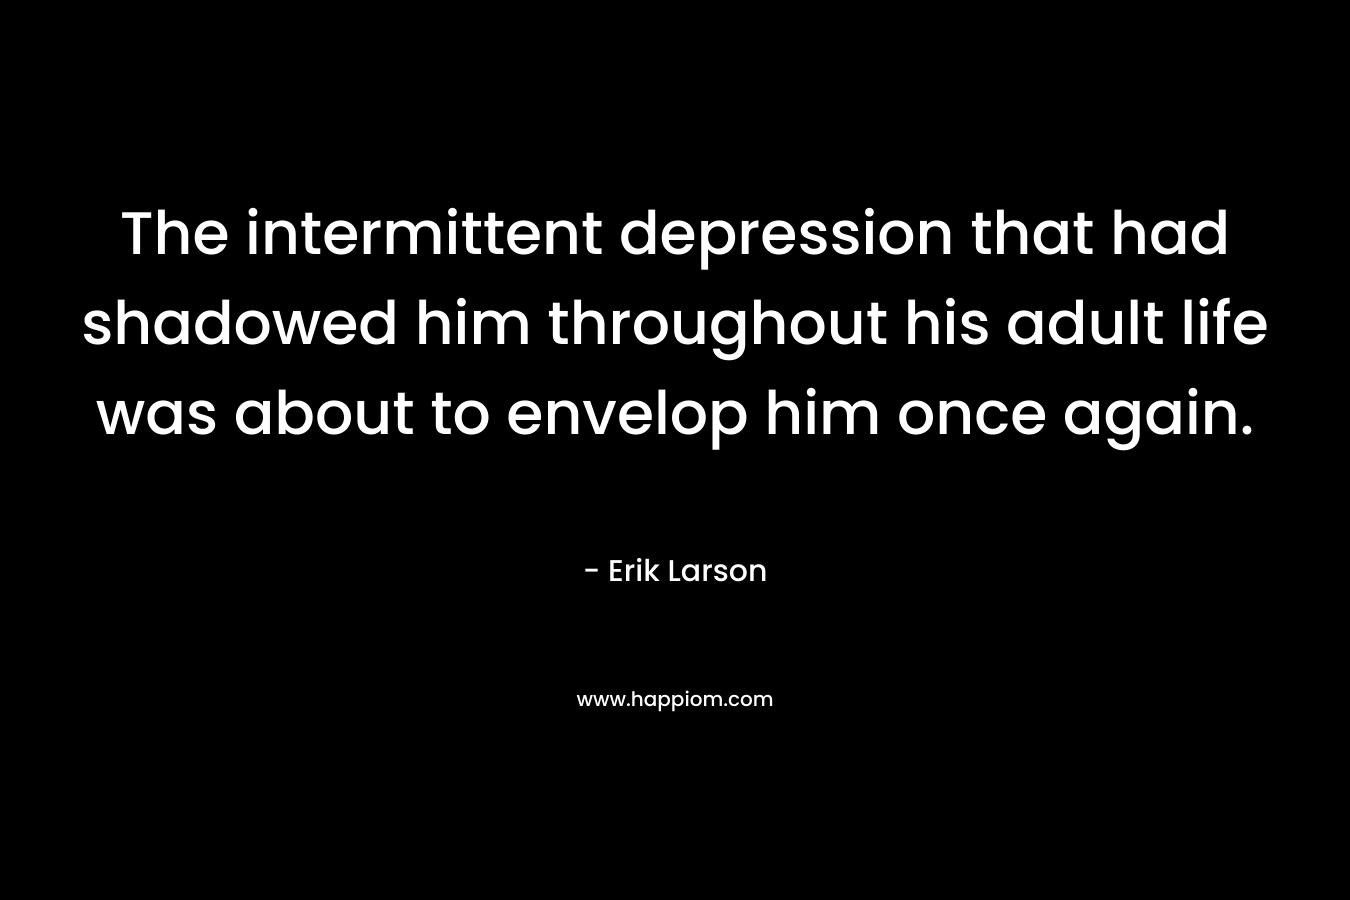 The intermittent depression that had shadowed him throughout his adult life was about to envelop him once again. 